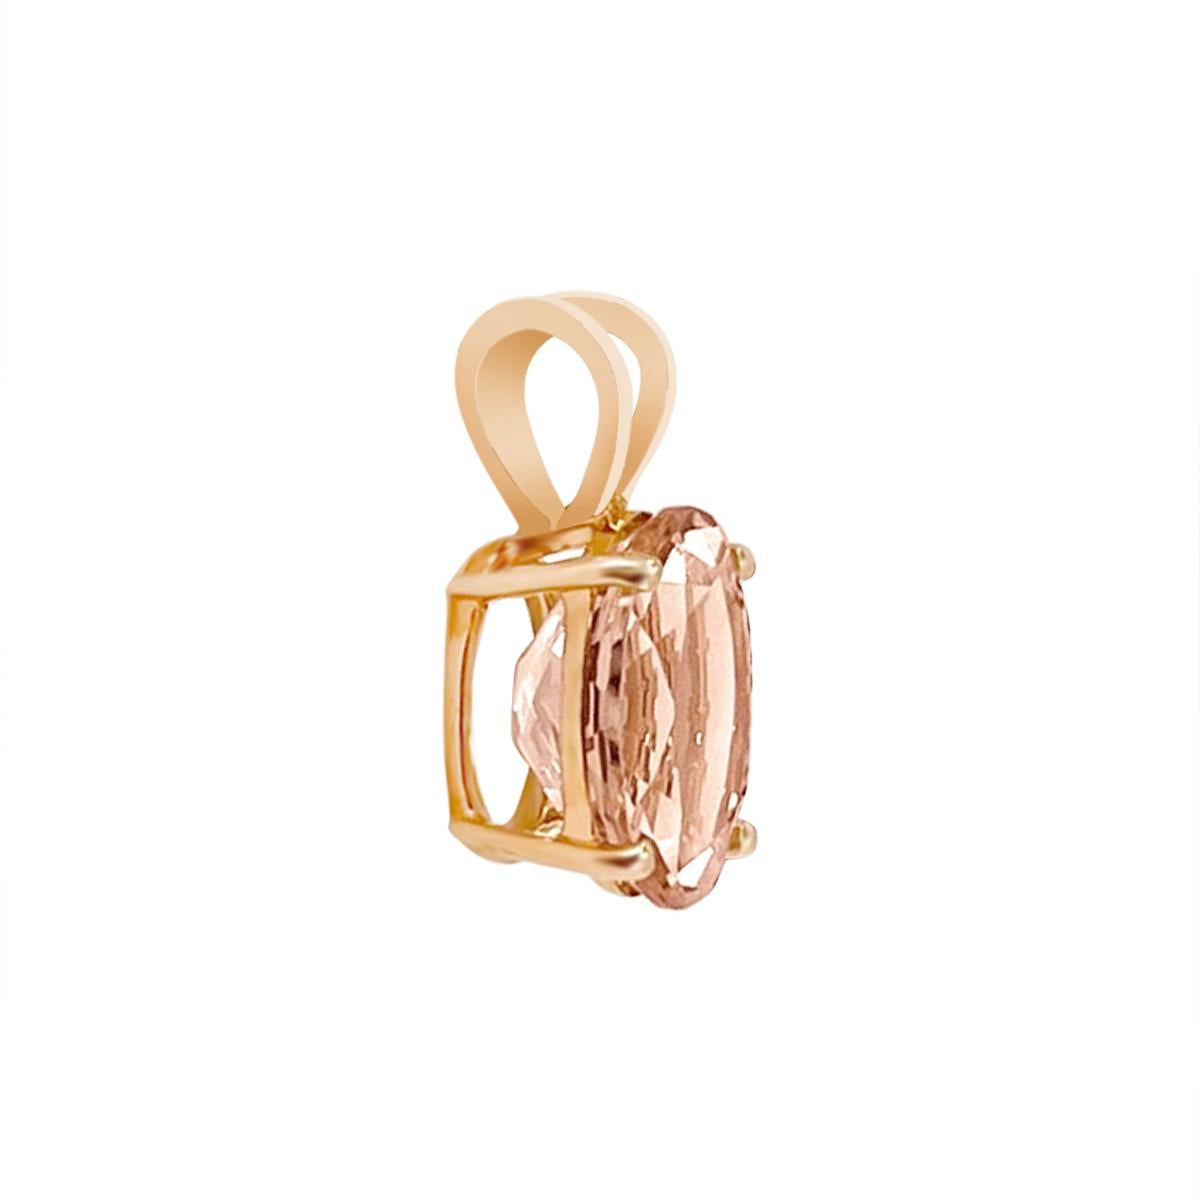 Beautifully Designed Simple Solitaire Pendant with a Soft and Gorgeous Peachy Pink Morganite in Solid 18K Rose Gold. This Oval Shaped Gemstone is a Perfect Addition to Your Wardrobe Whether for the Night Out or Everyday.

Style# TS1246MOP
Morganite: